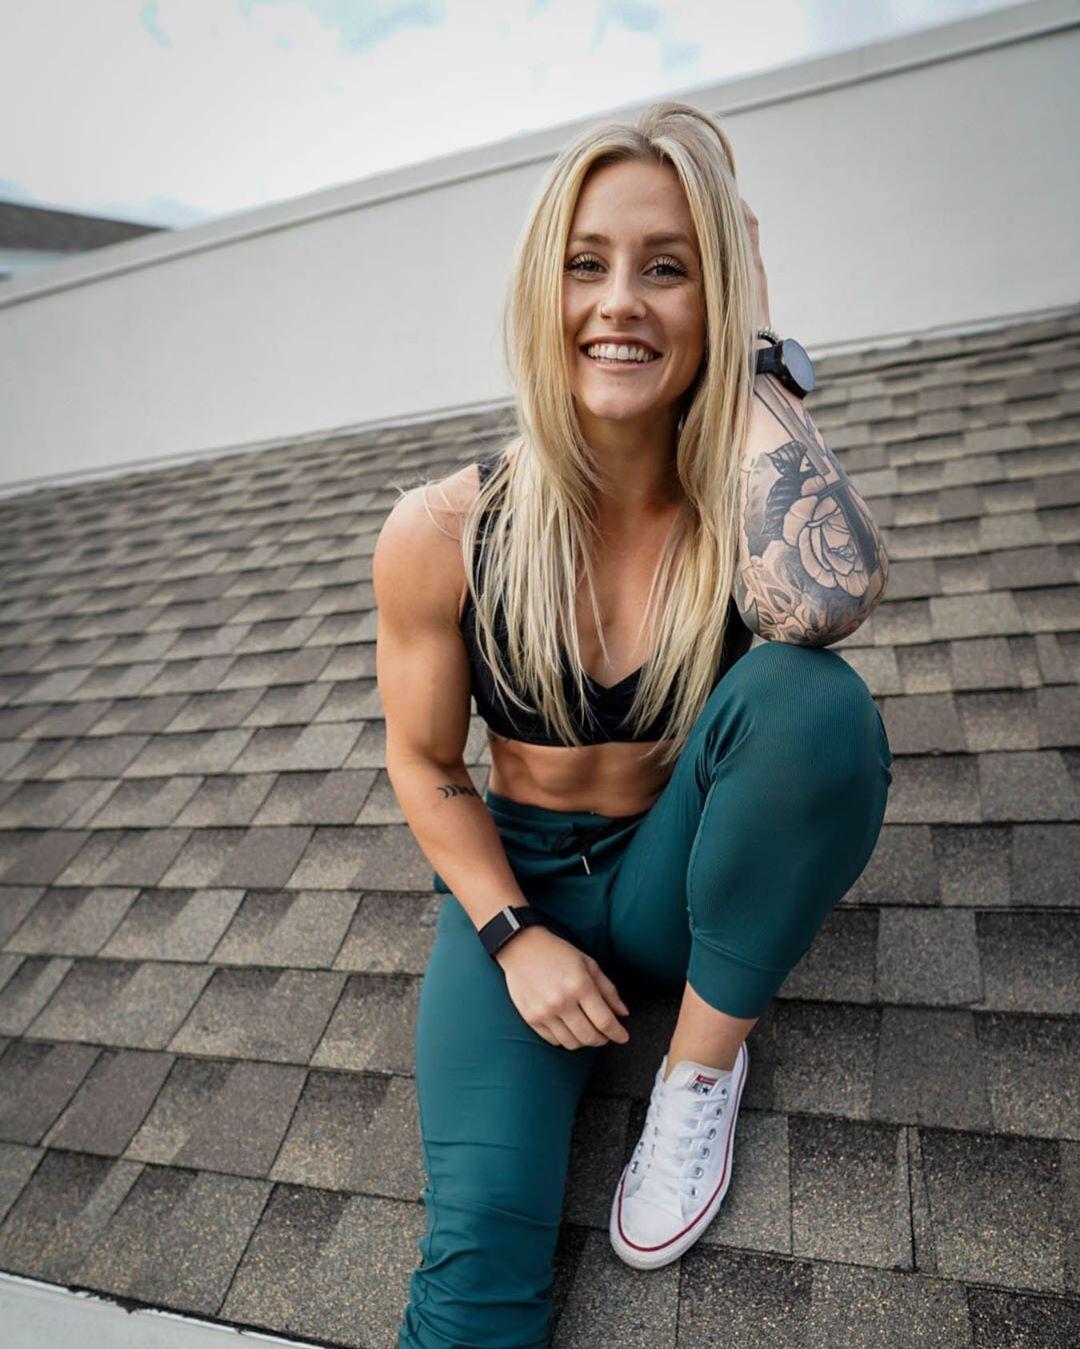 51 Hot Pictures Of Josie Hamming That Will Fill Your Heart With Joy A Success 30